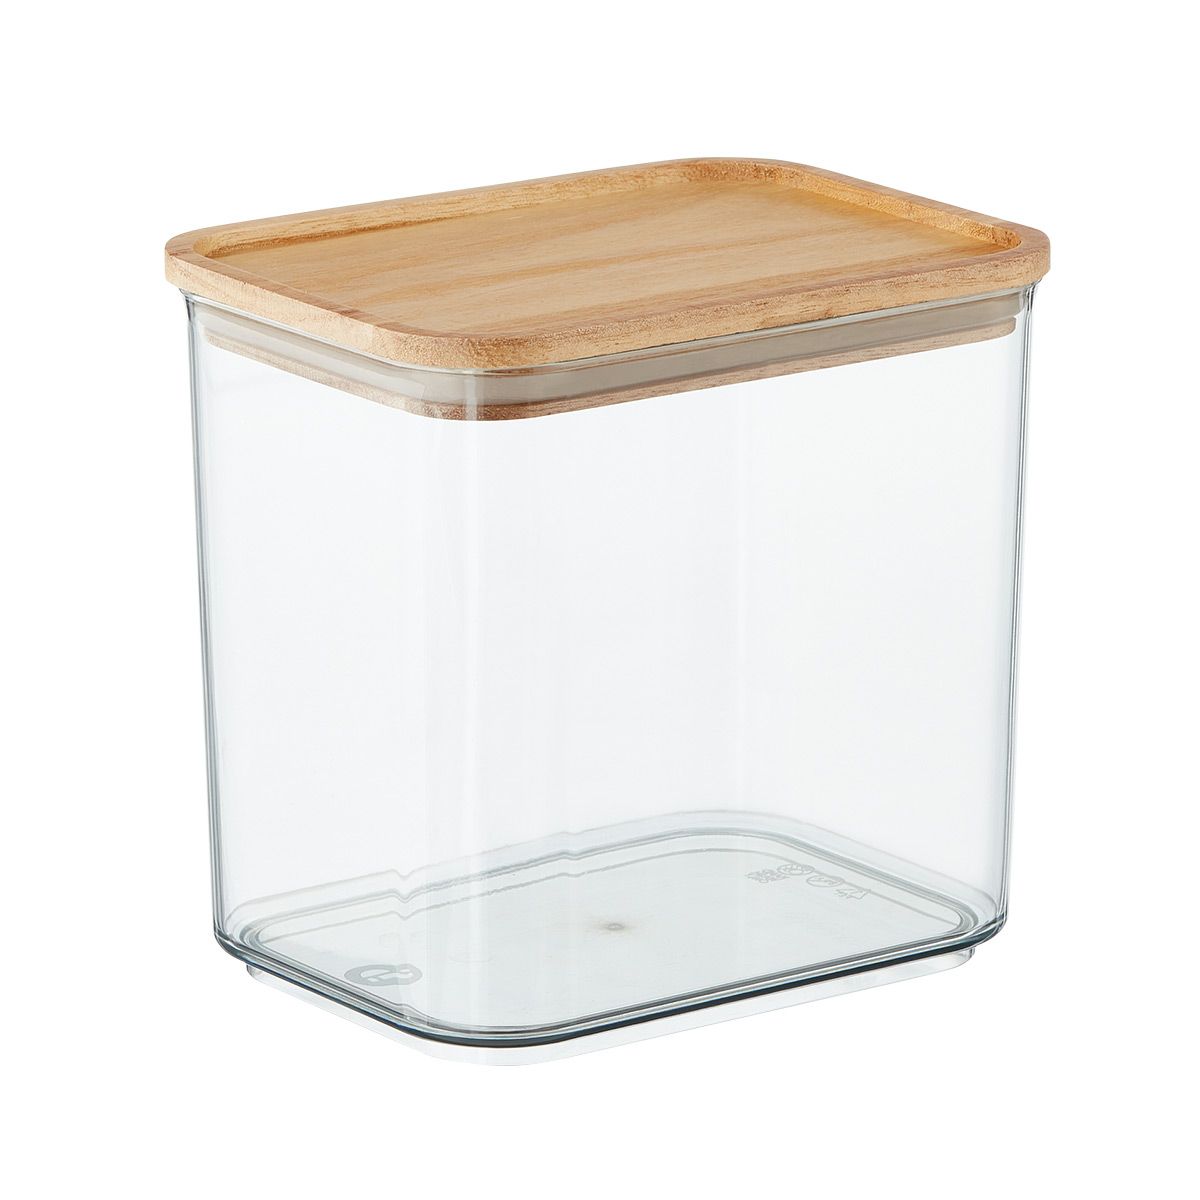 Rosanna Pansino x iD 8.4 c. Canister w/ Wood Lid Clear | The Container Store